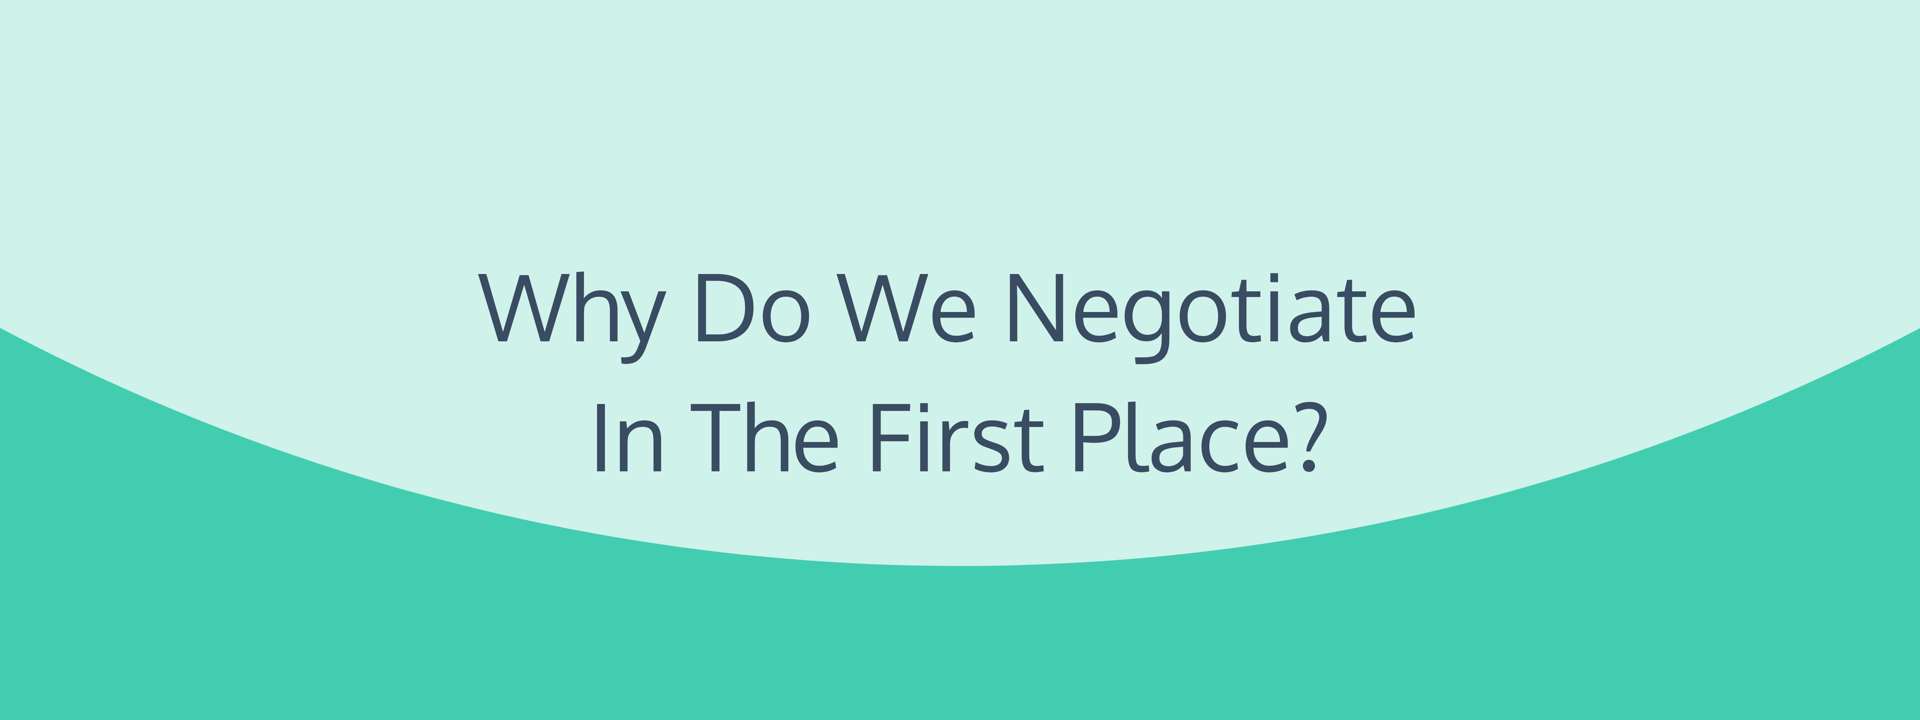 Why Do We Negotiate In The First Place?